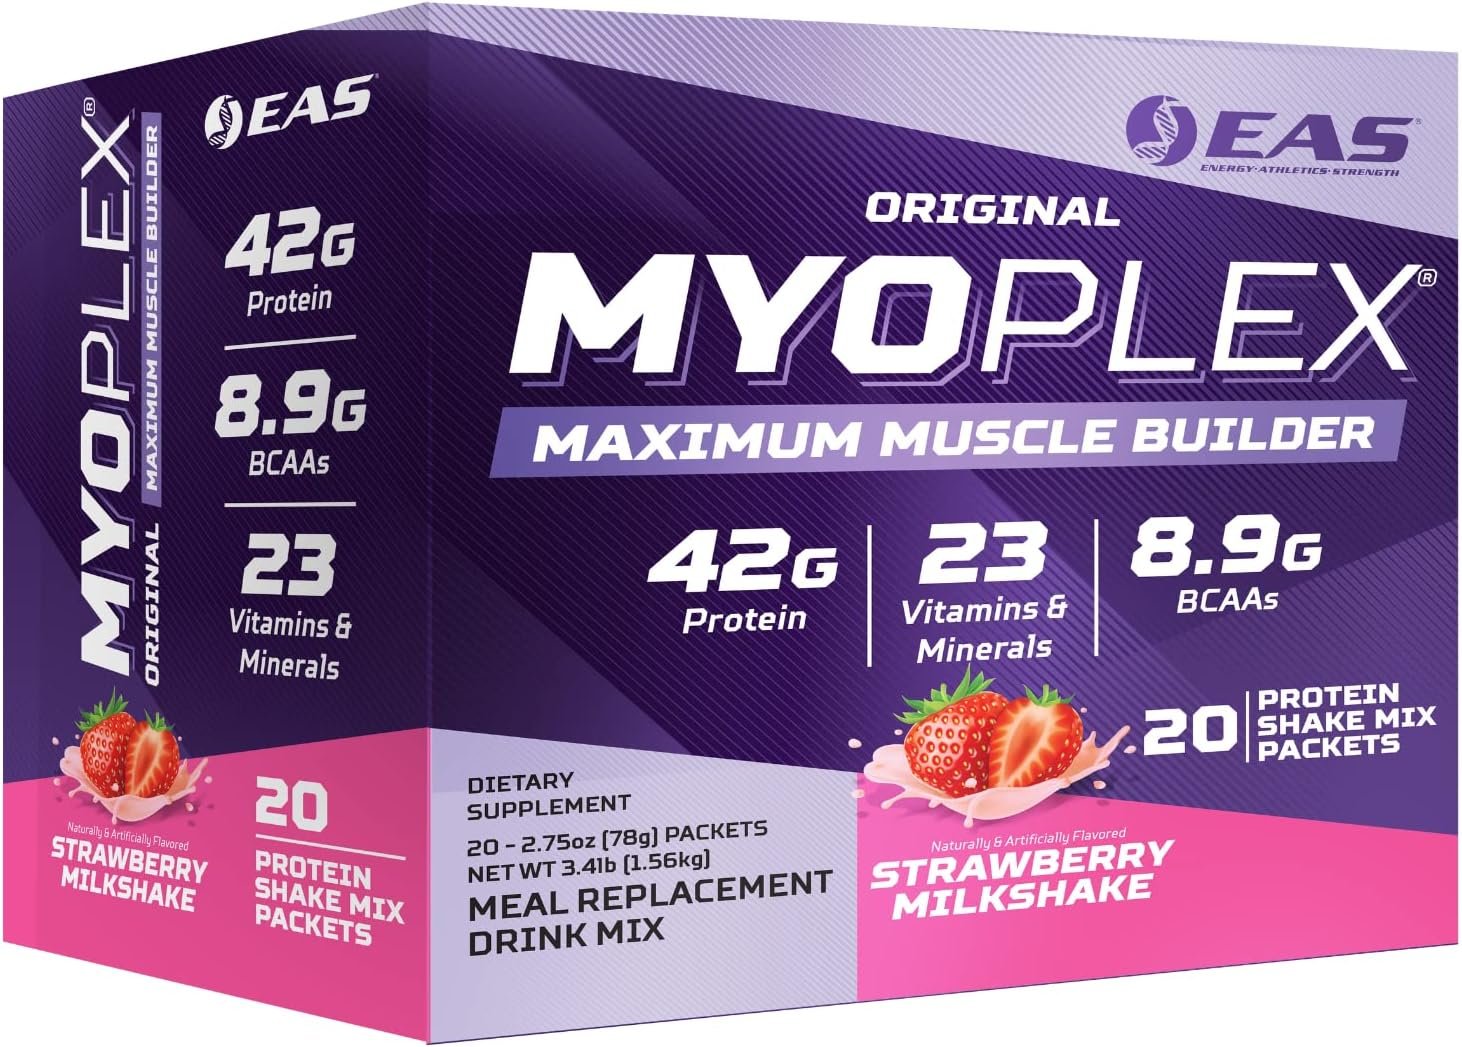 EAS Original MYOPLEX Maximum Muscle Builder - Meal Replacement Protein Mix - Cinnamon Cereal Crunch - 20 Individual Packets - Quality Protein Blend - 42g Per Serving